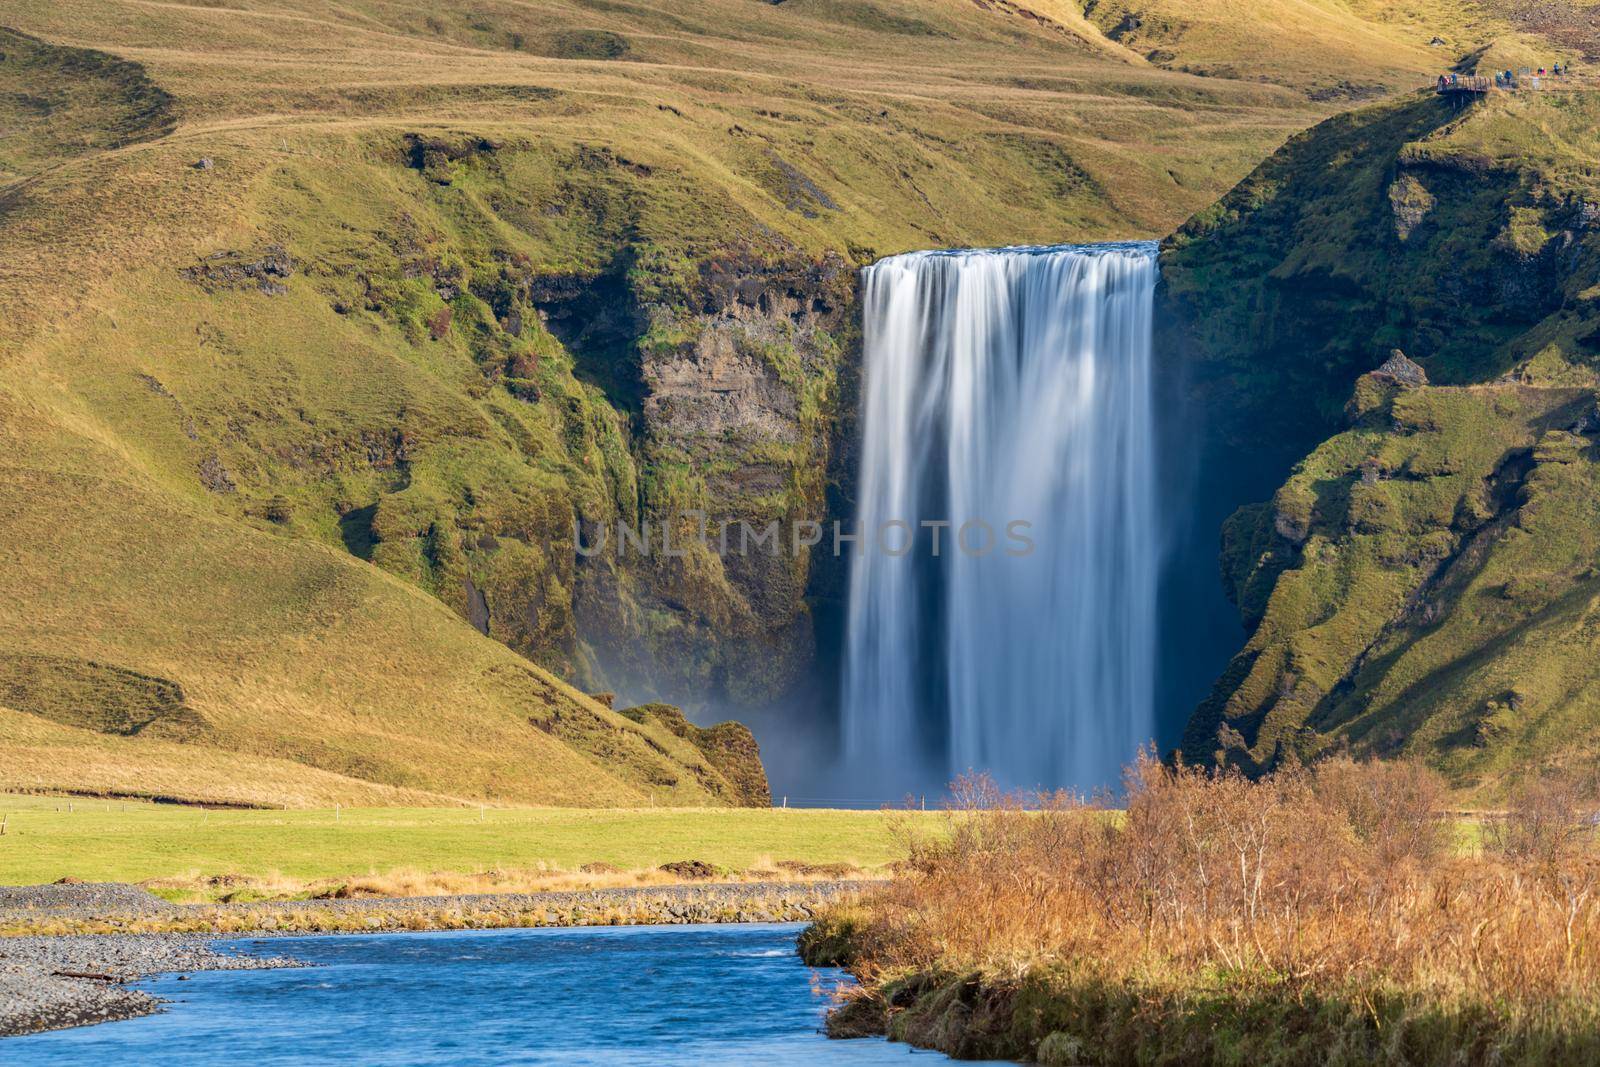 Long exposure of famous Skogafoss waterfall from the distance with hikers on top viewpoint by FerradalFCG